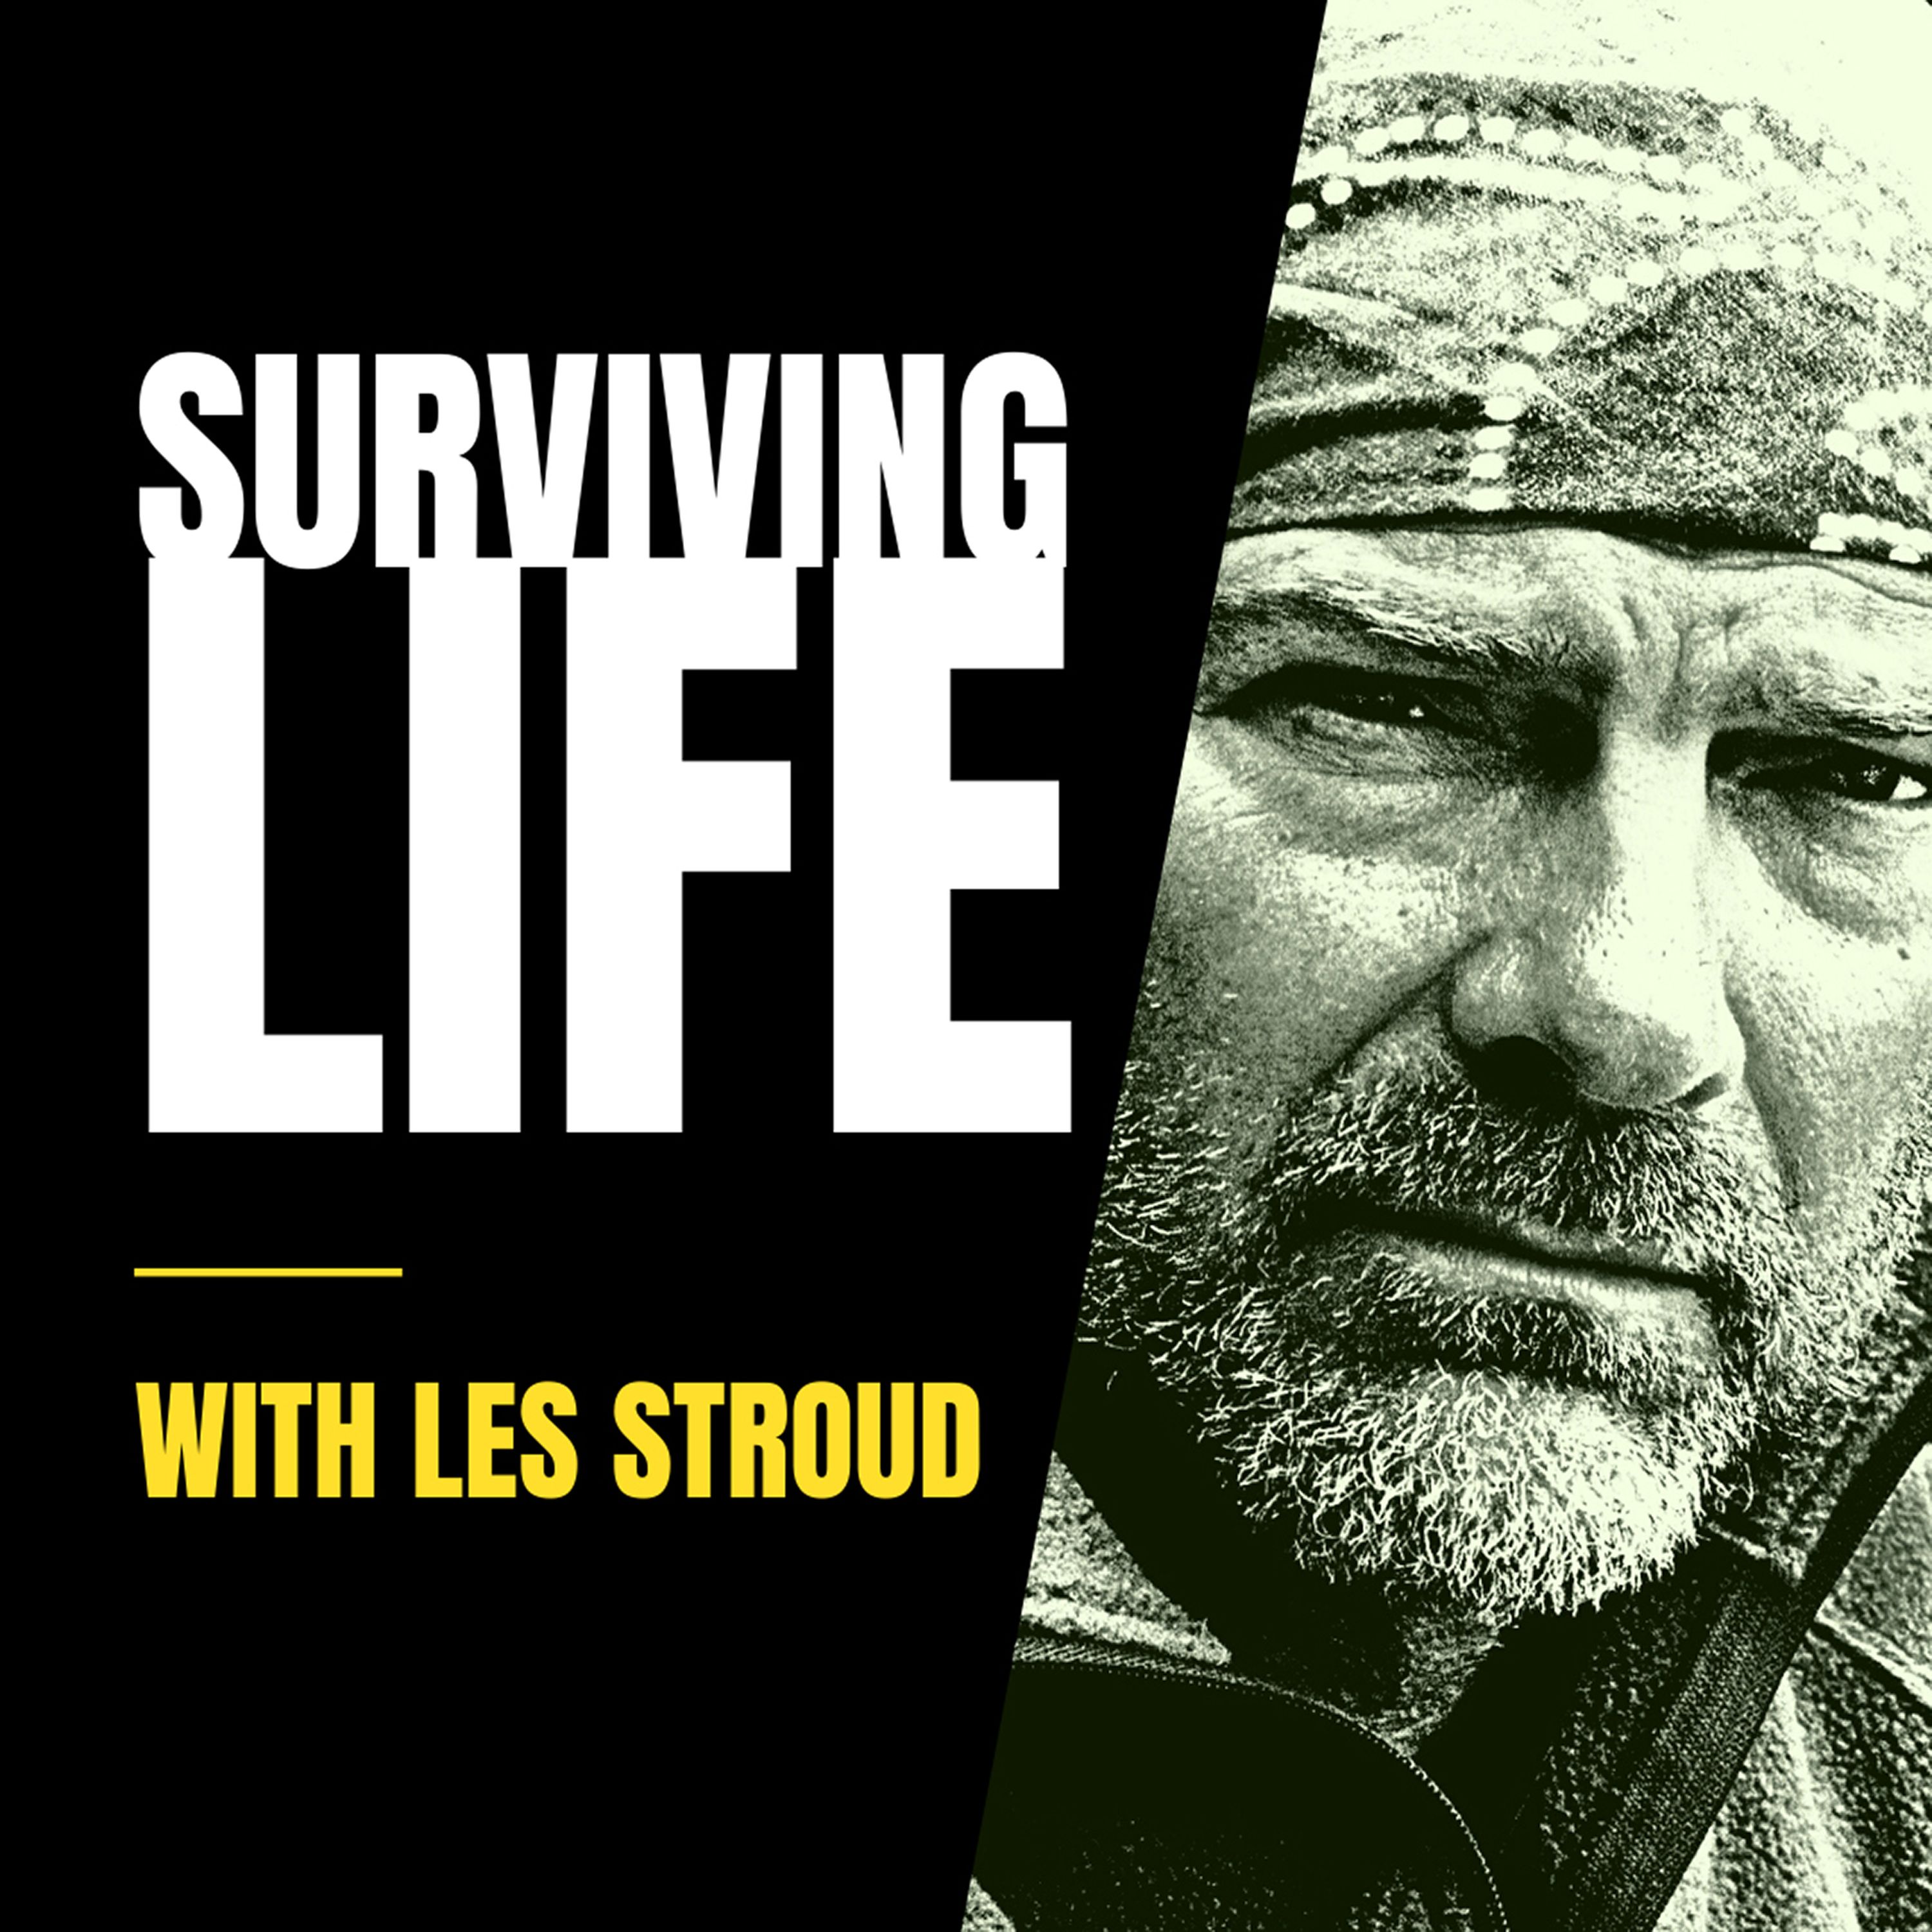 Les Stroud IMO - Trolls & Haters